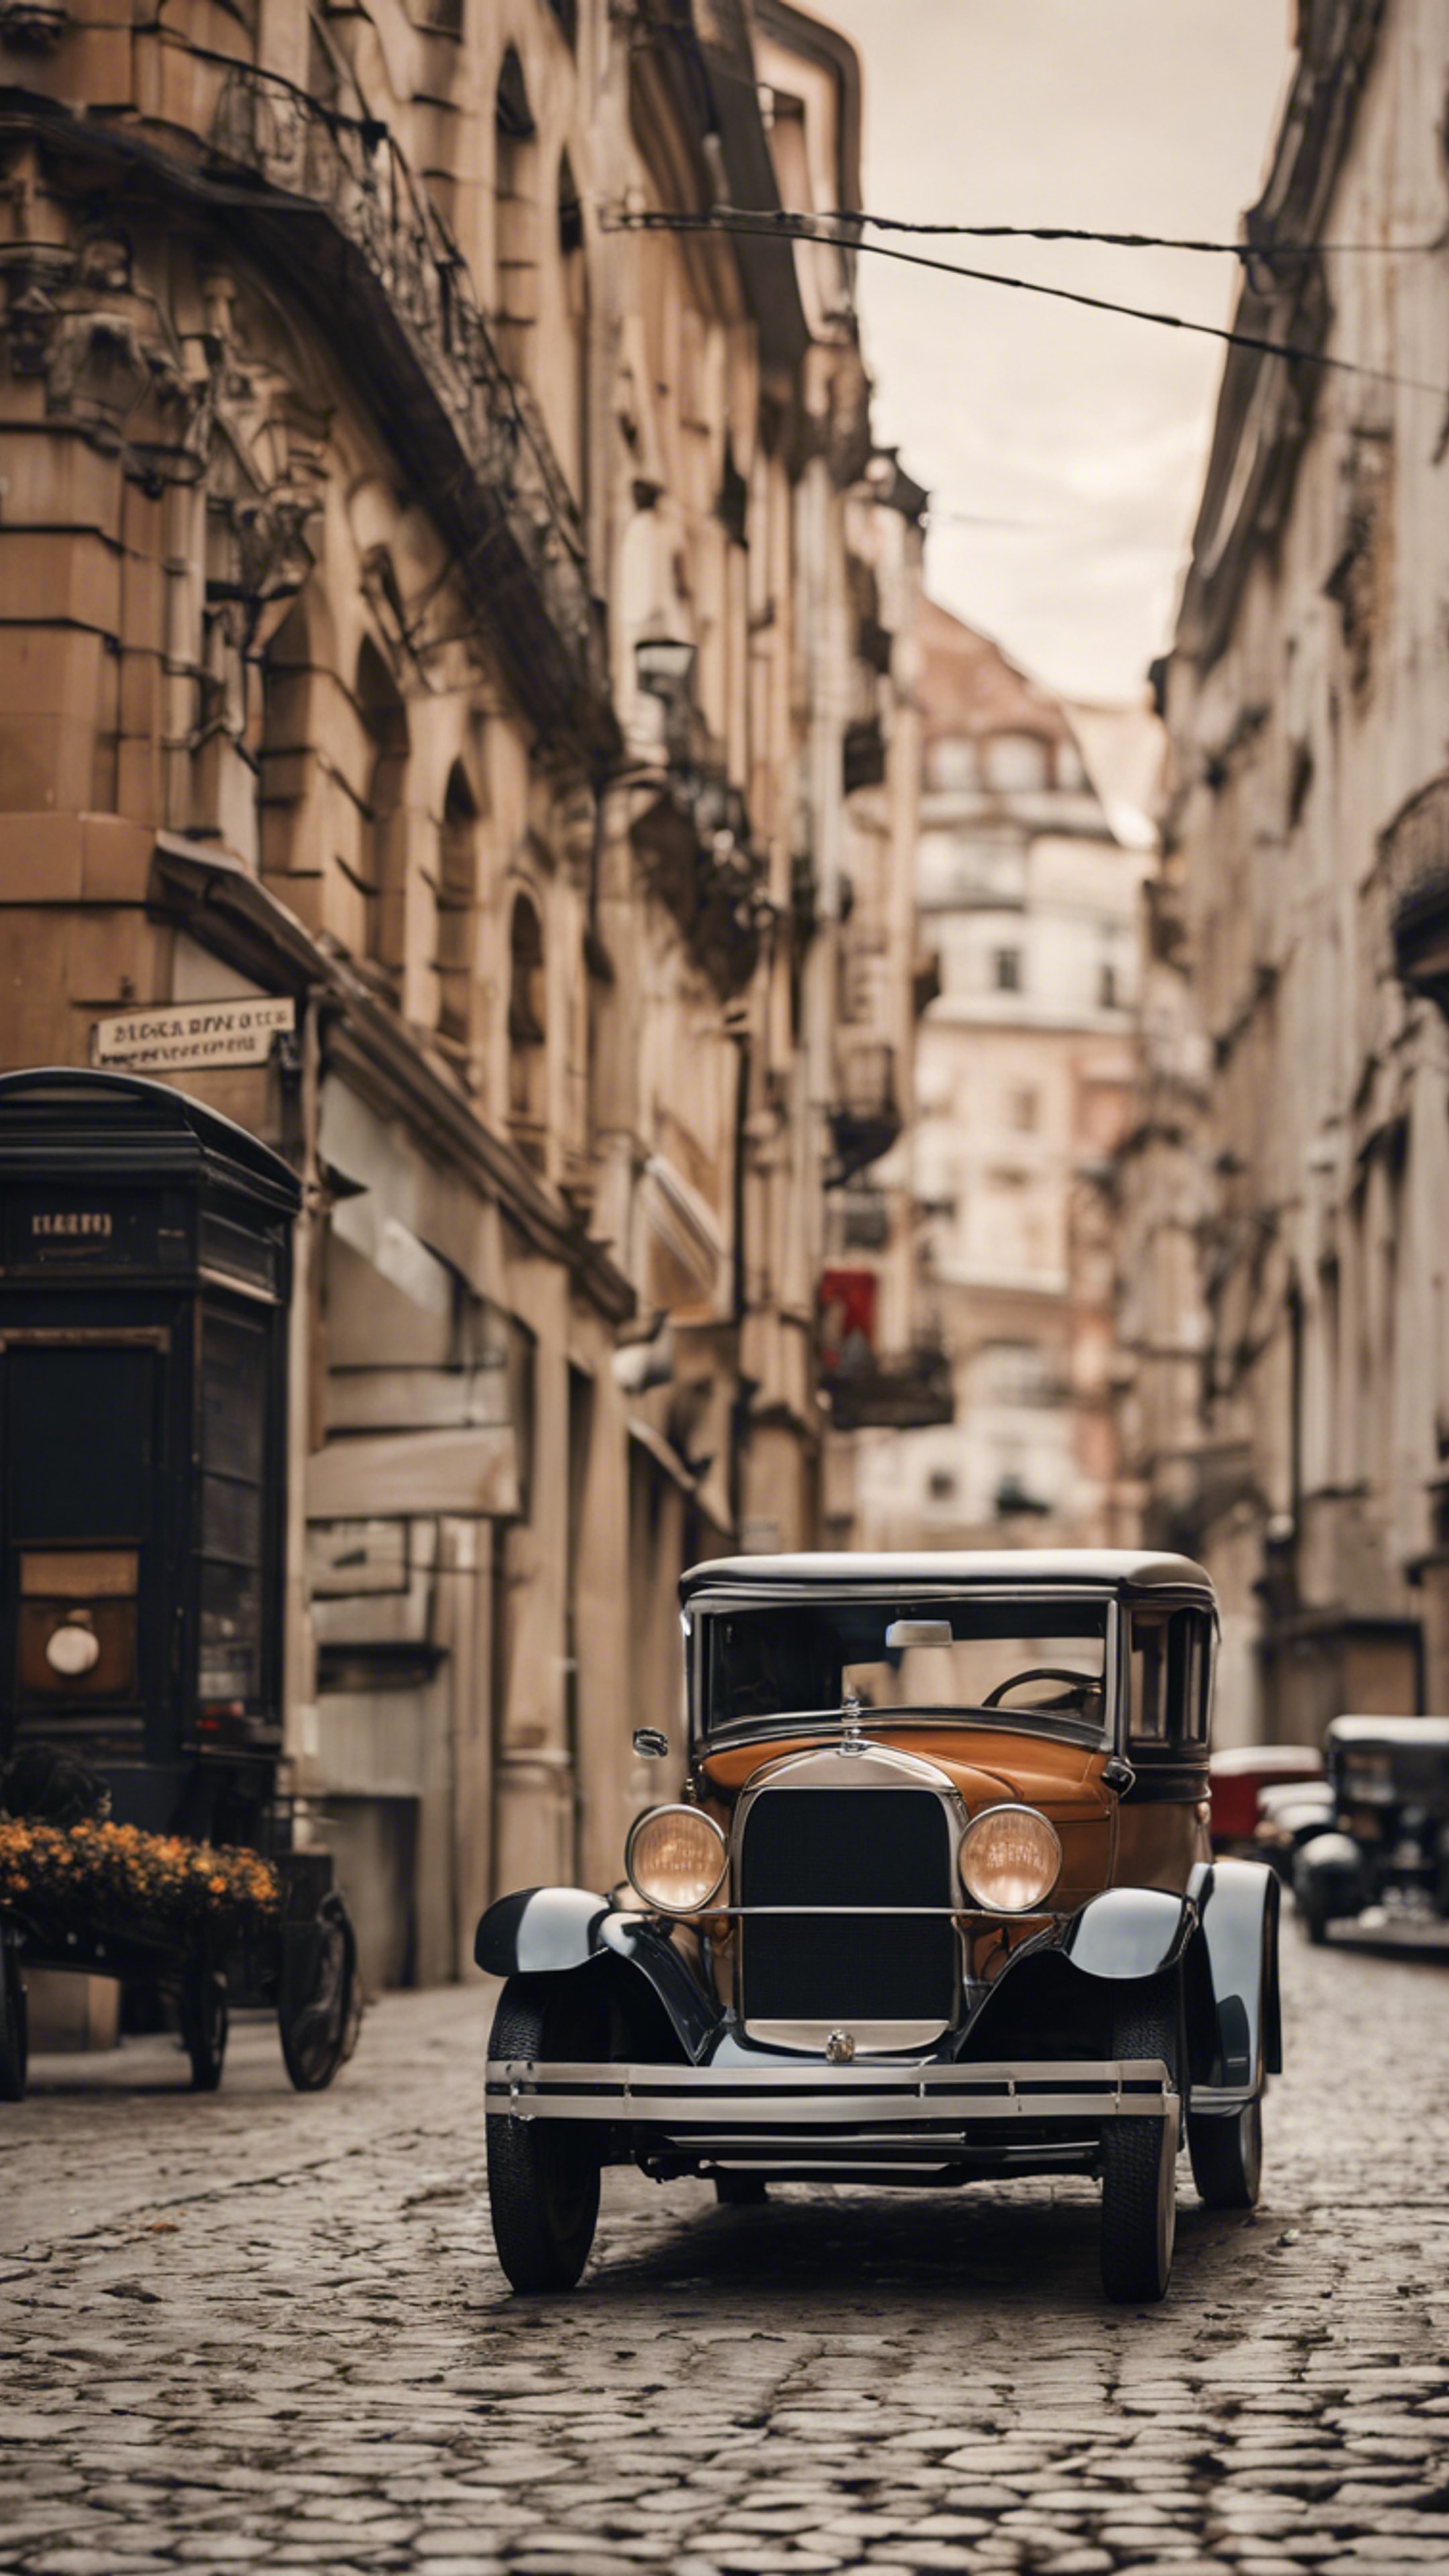 A nostalgic cityscape in the 1920s with classic cars and cobblestone streets. Behang[d252acda6f644acf85b4]